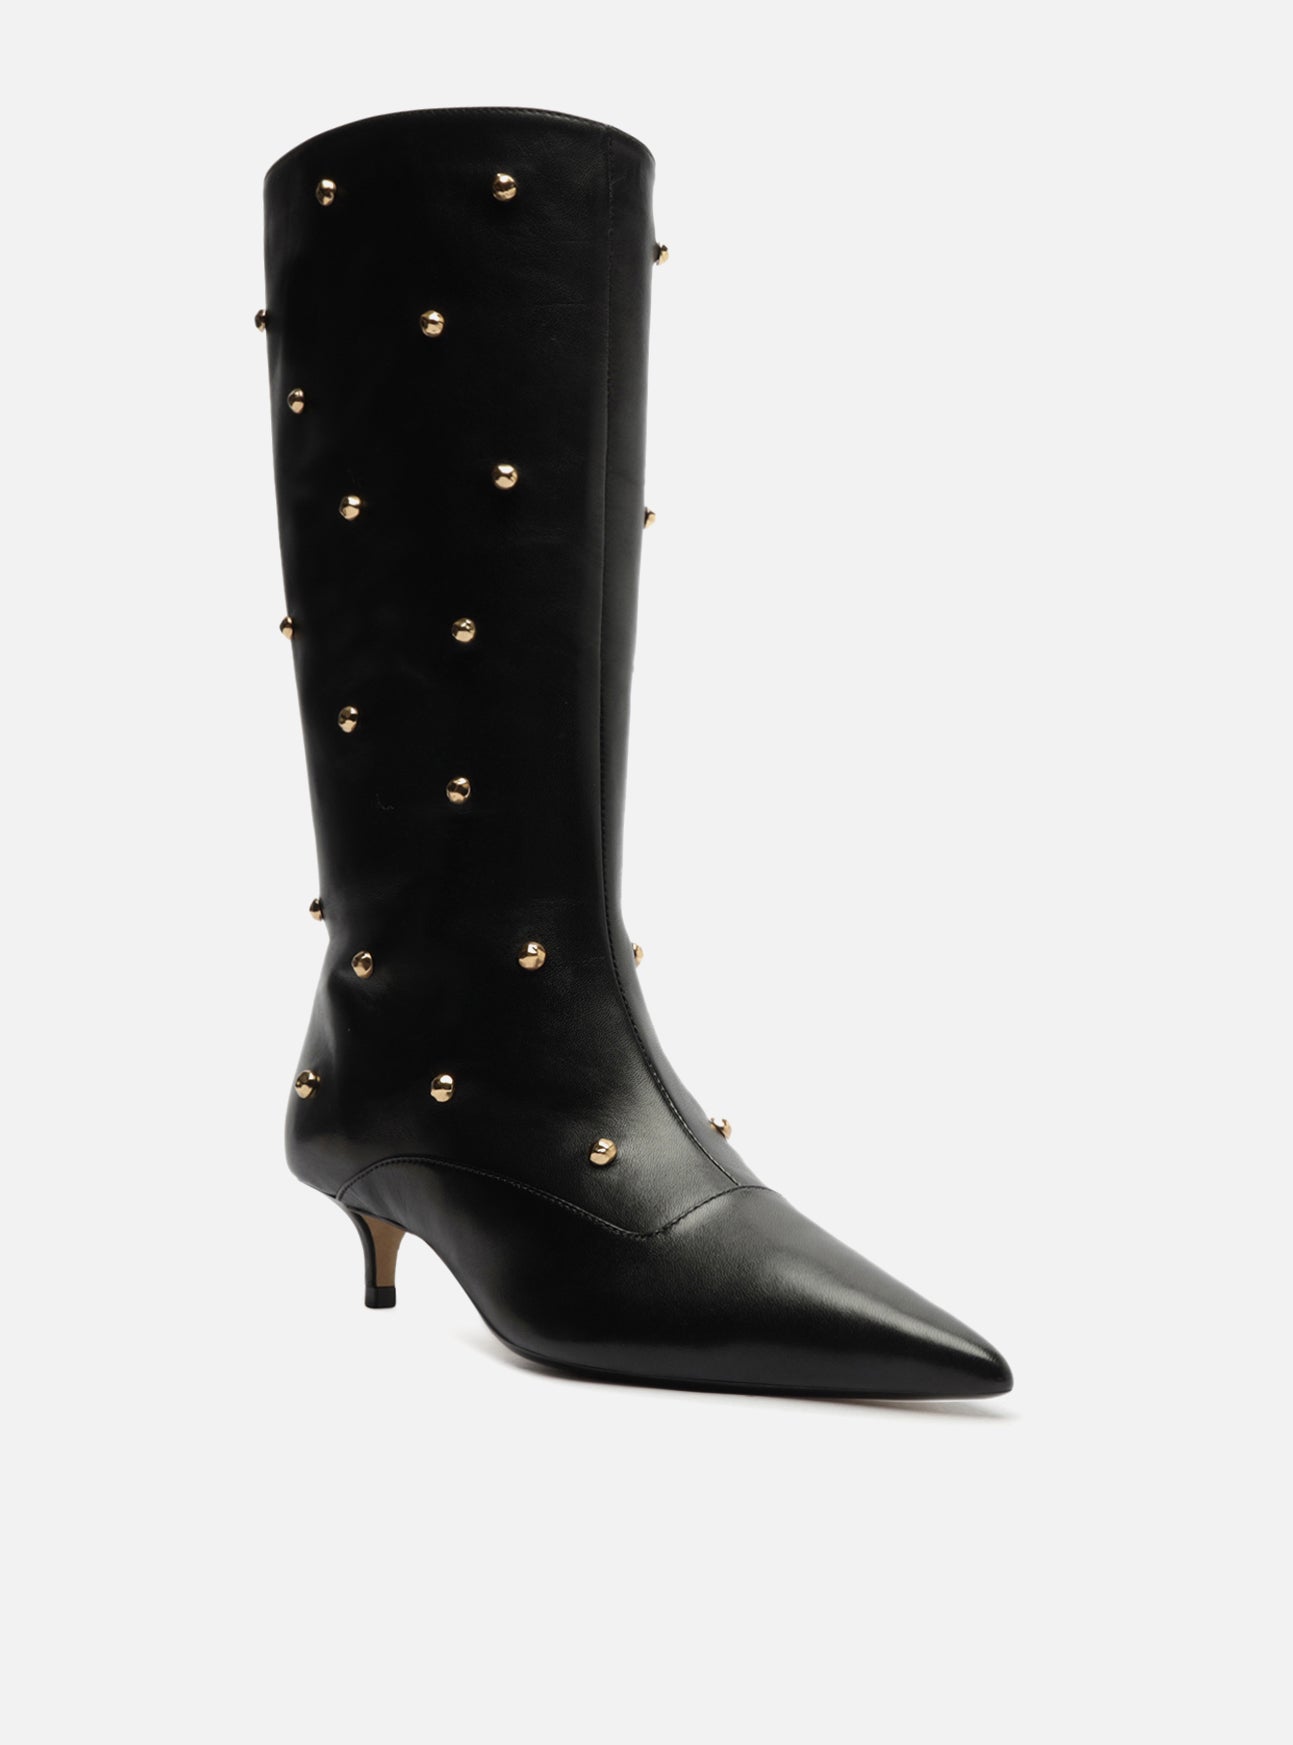 " Black leather ankle boots with a mid-calf, kitten heel and pointed toe. It has a tight upper and golden metallic studs throughout the shaft."